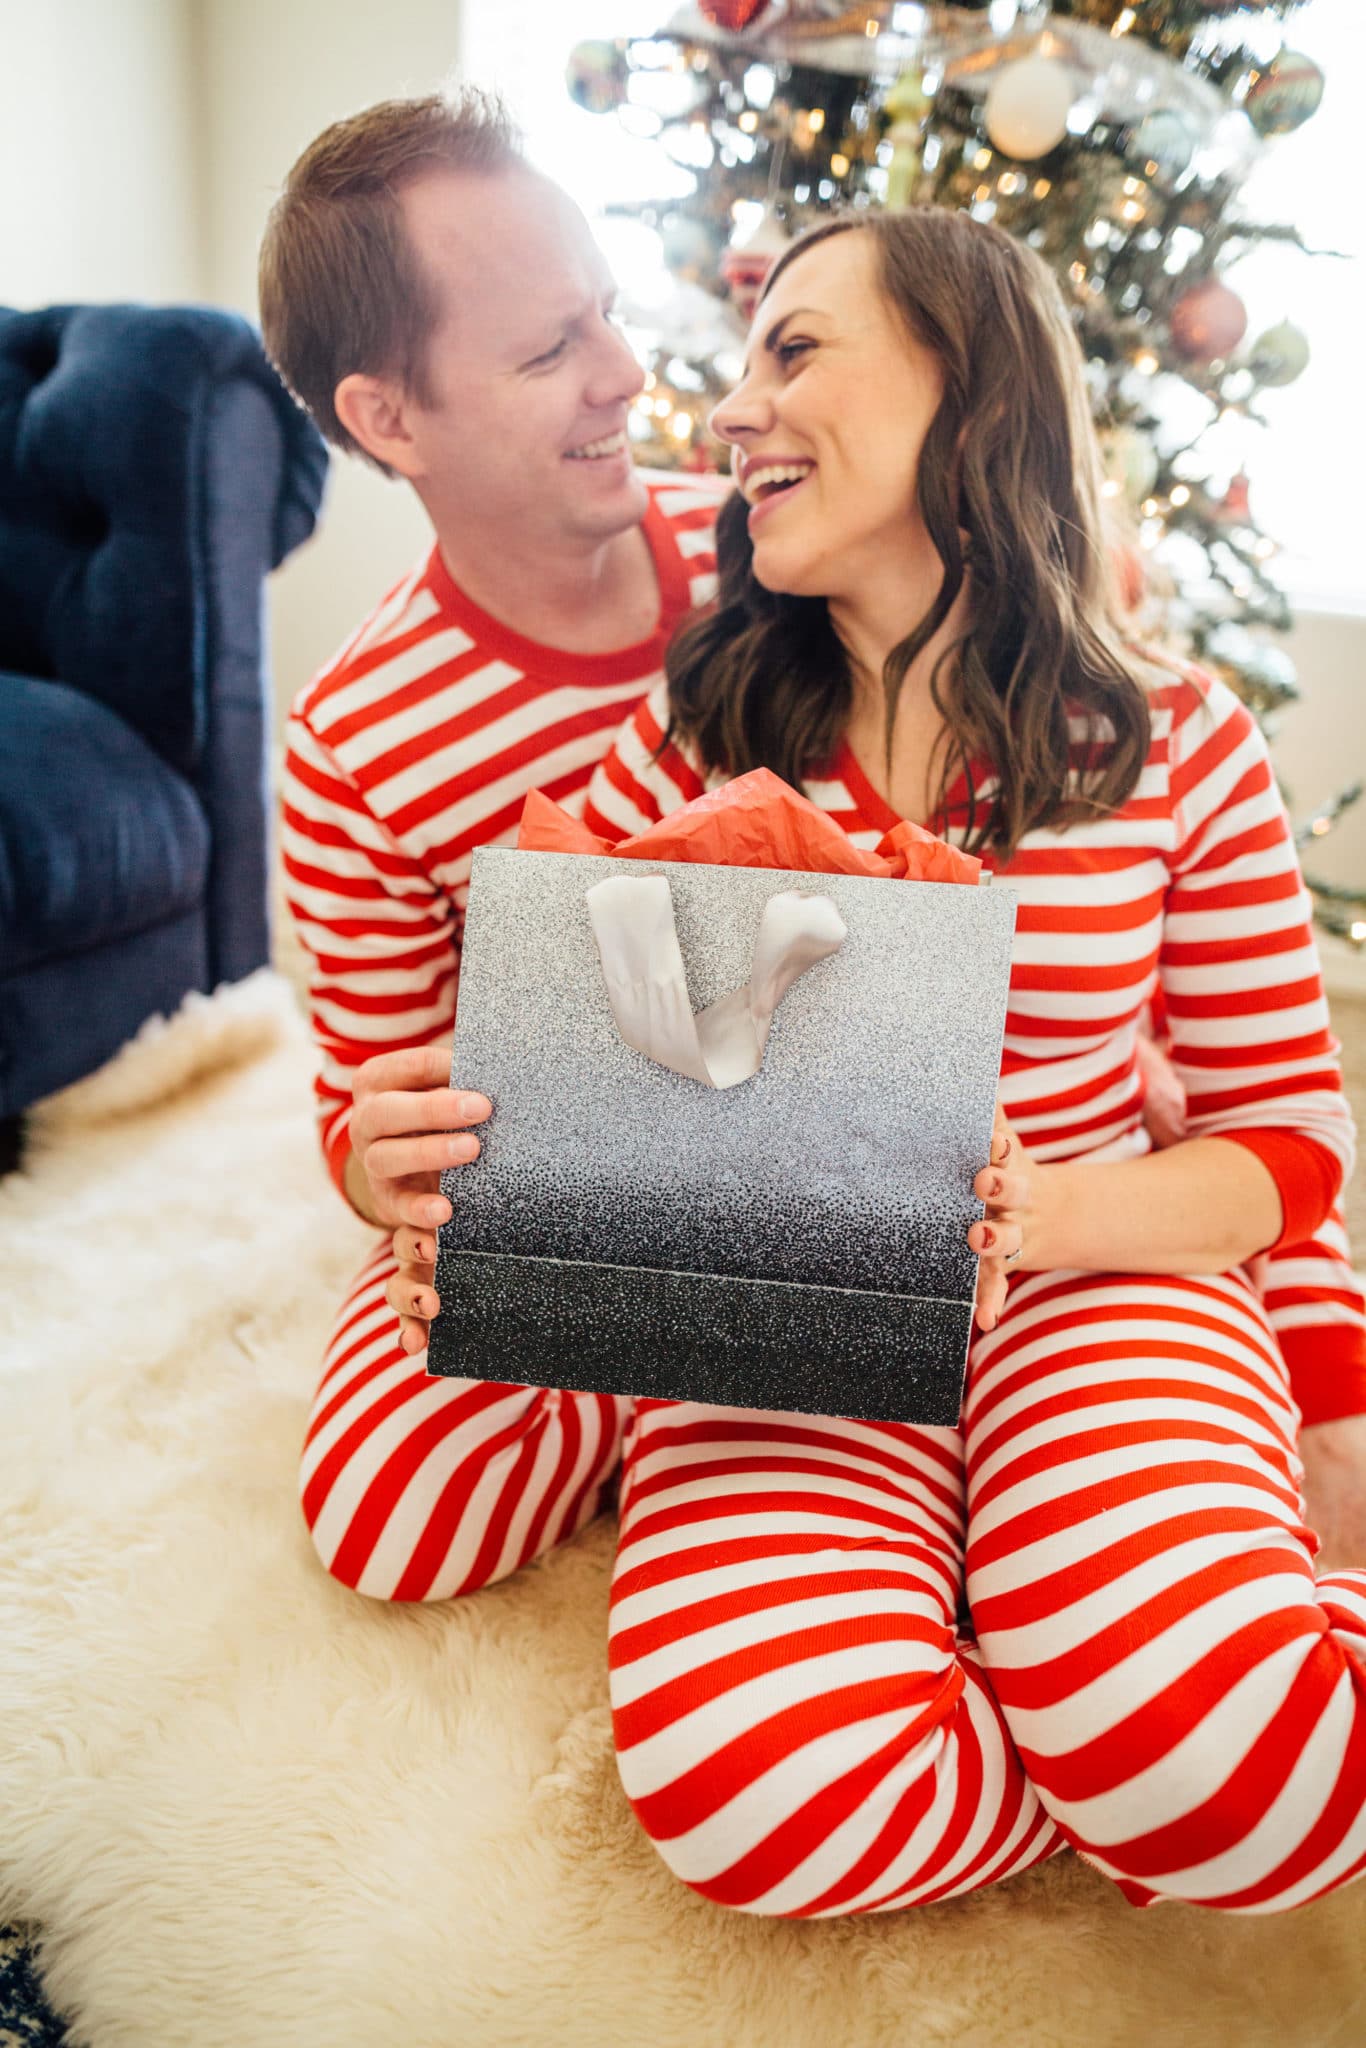 Husband Gift Guide: What to Get Your Husband for Christmas